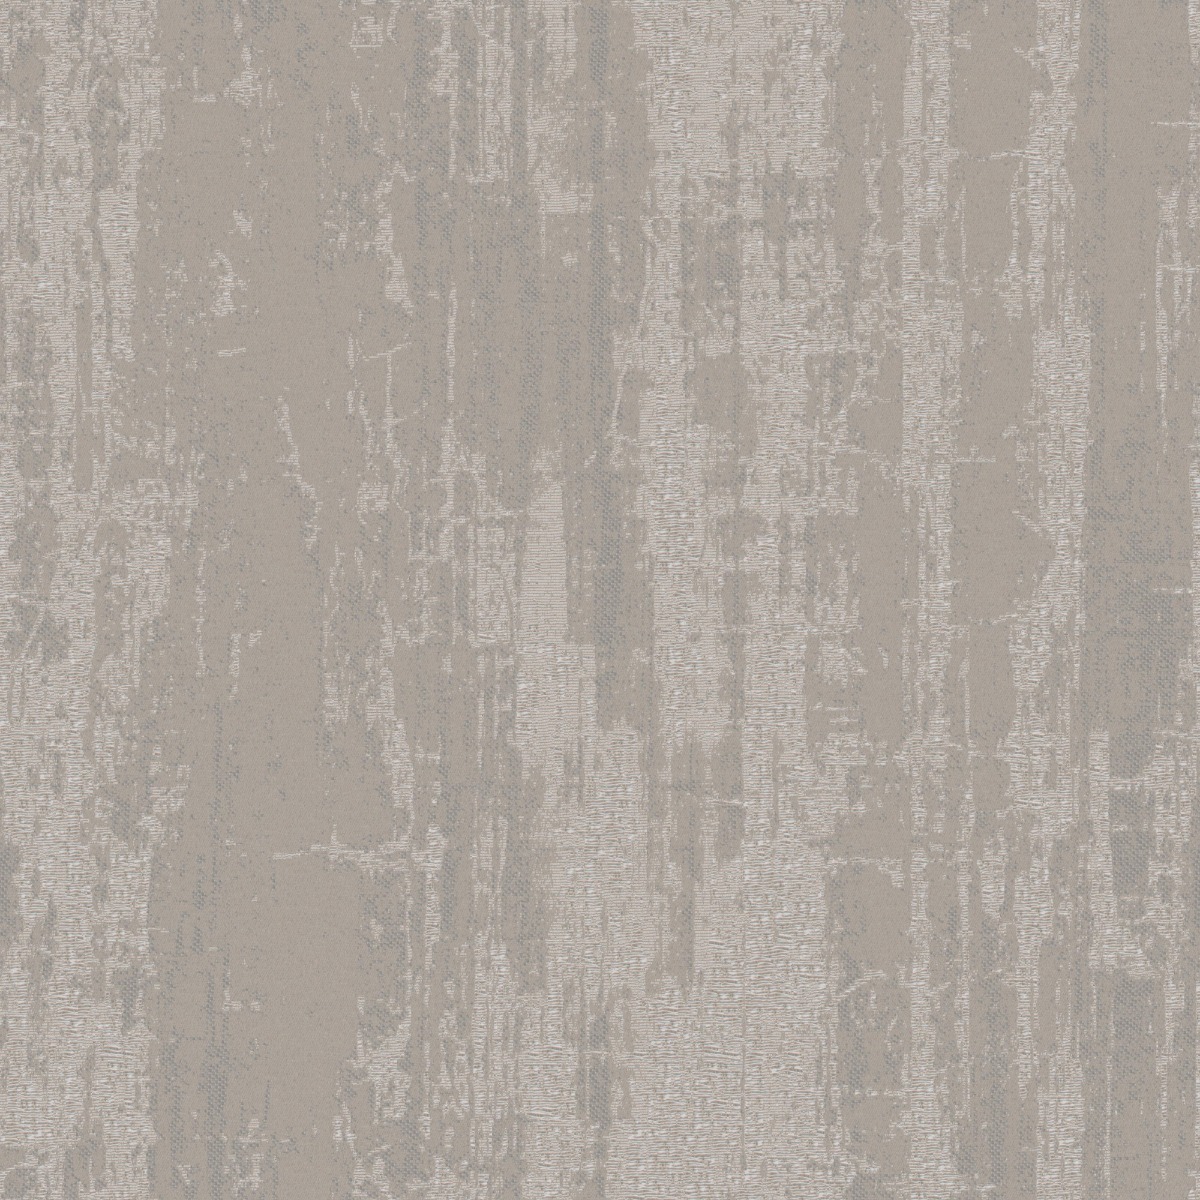 A seamless fabric texture with graphical natural jacquard units arranged in a None pattern